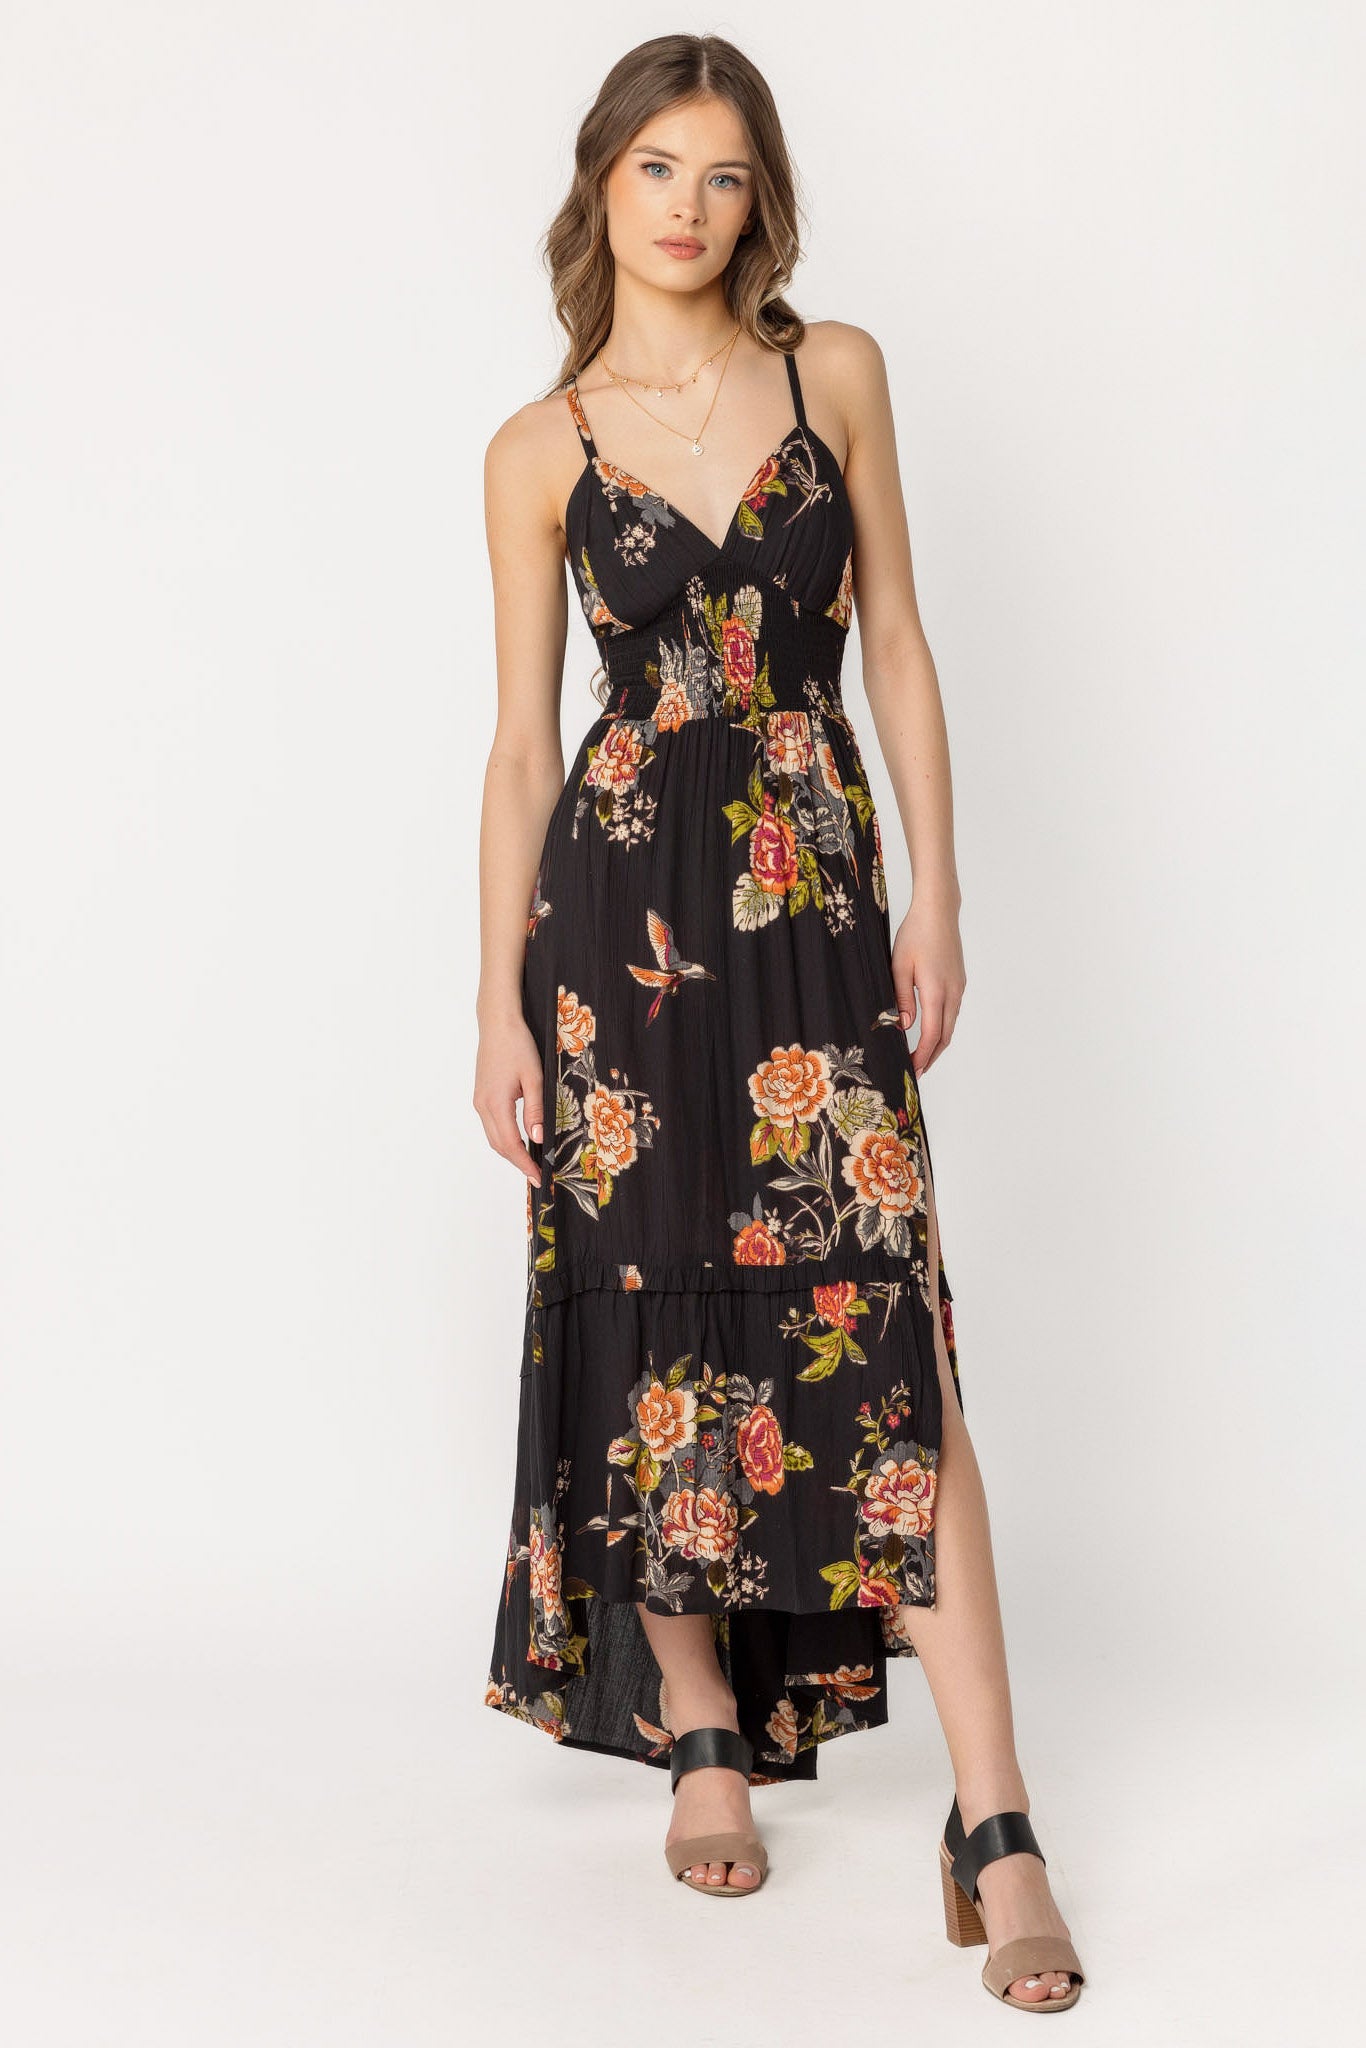 Floral/Bird Smocked High Low Dress with Lace-Up Back